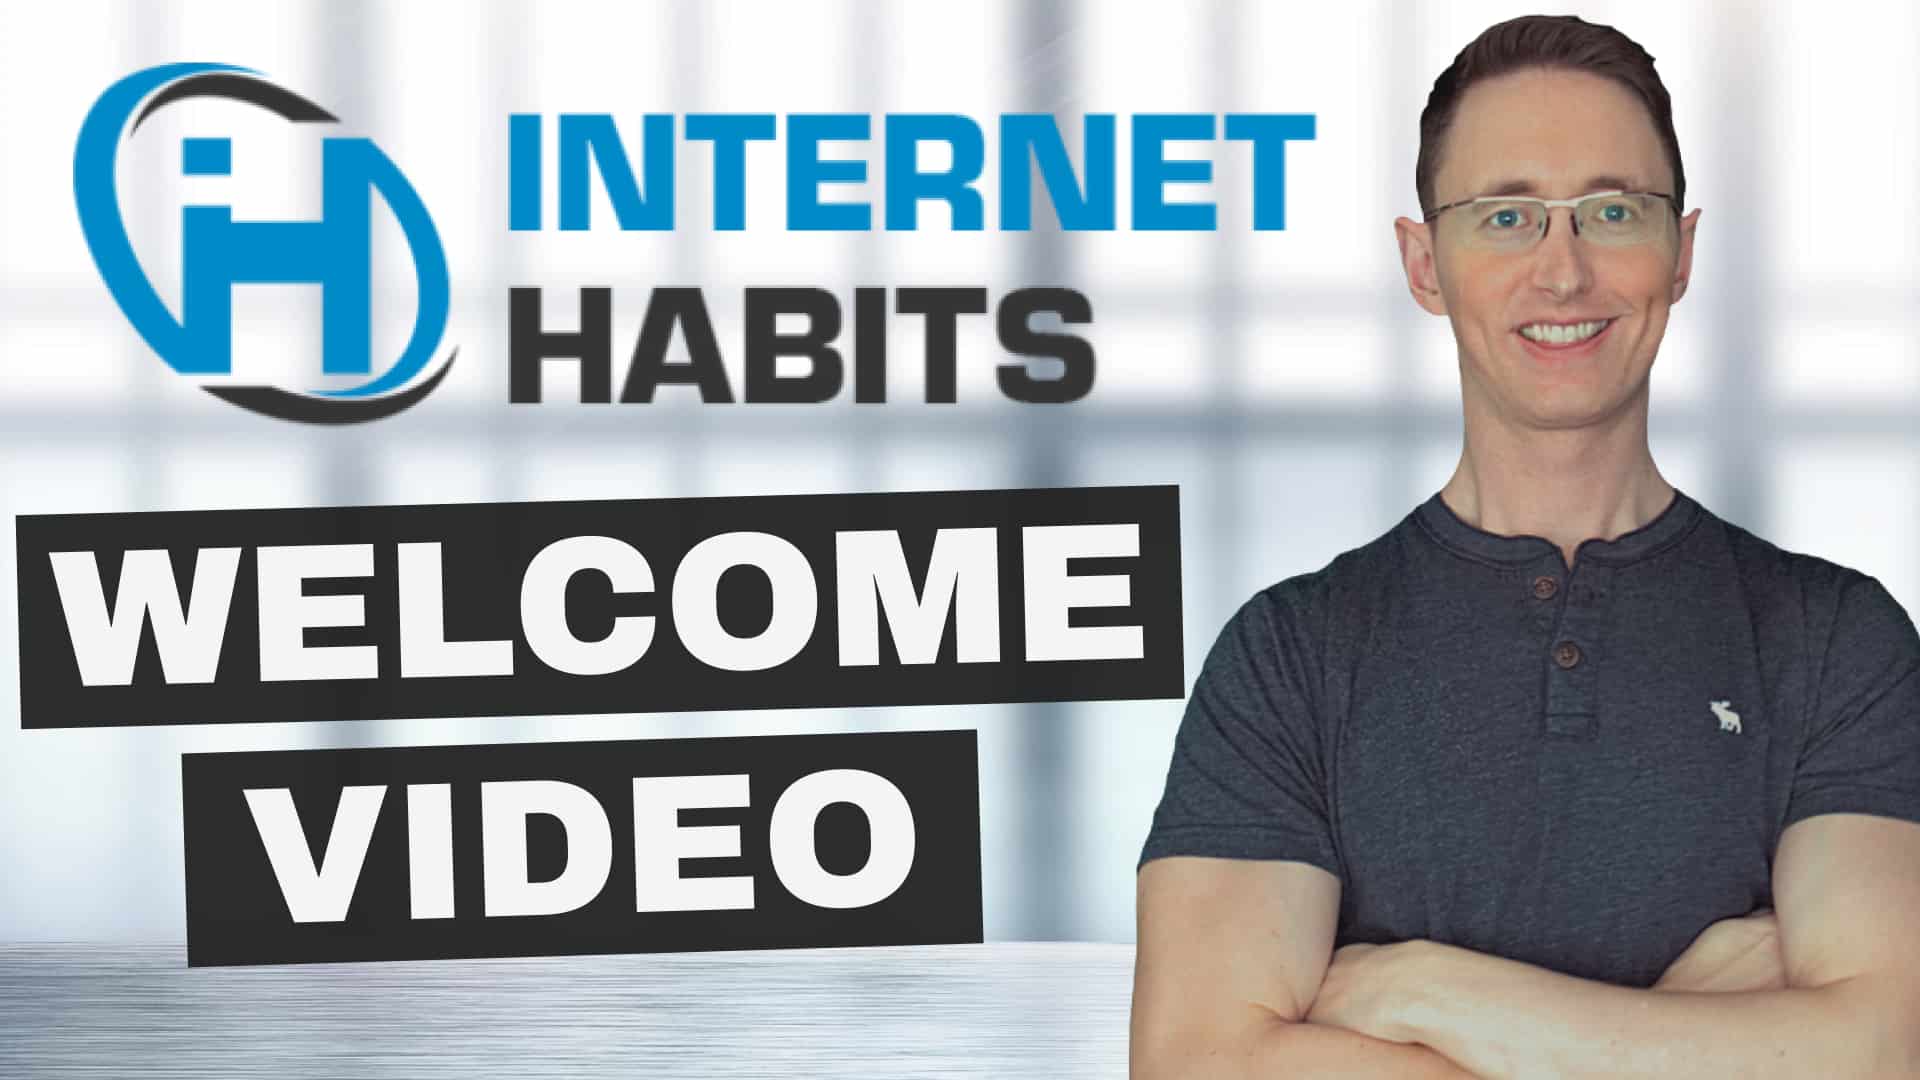 Welcome: How To Get Started with Internet Habits